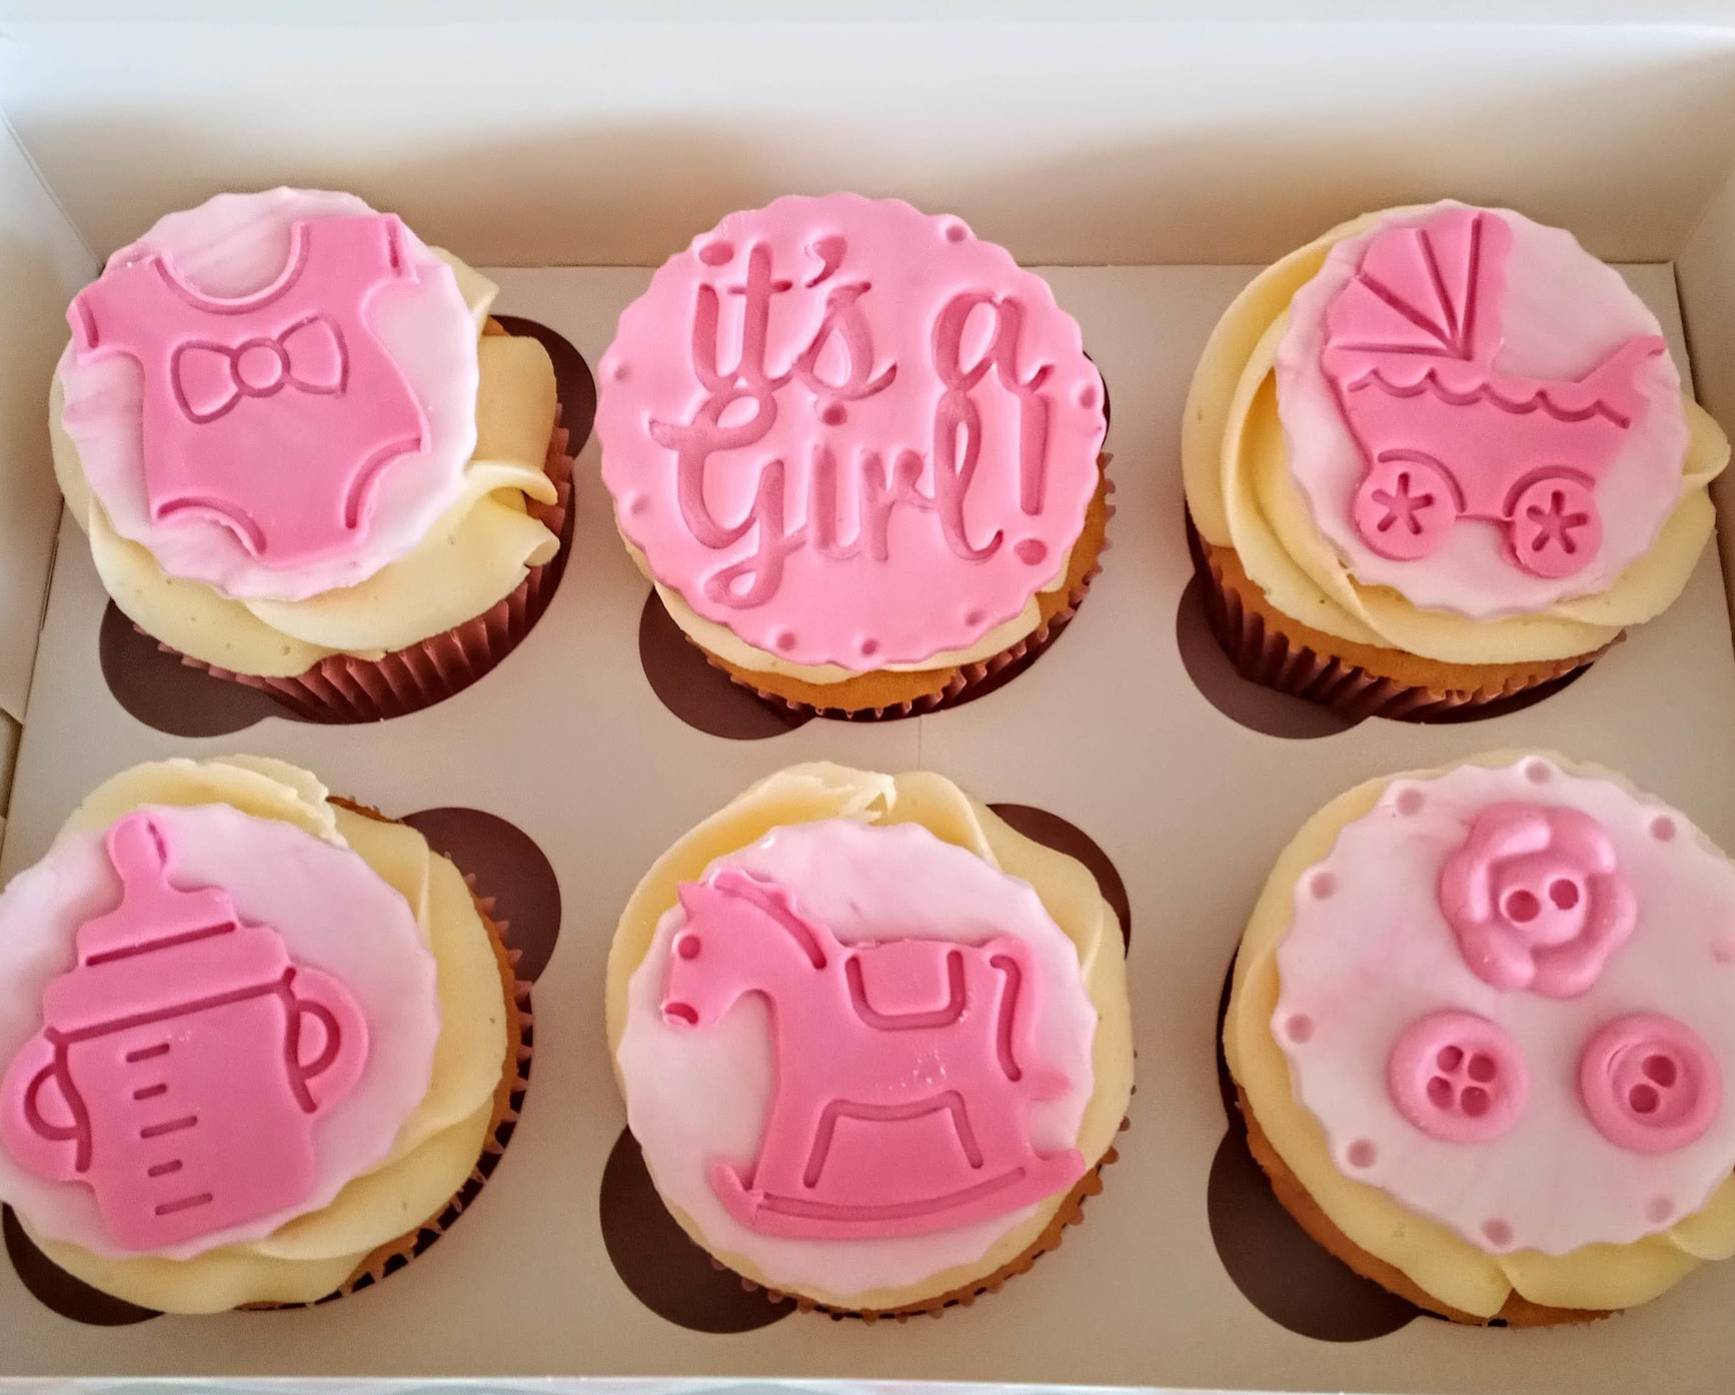 "Its a Girl" cupcakes